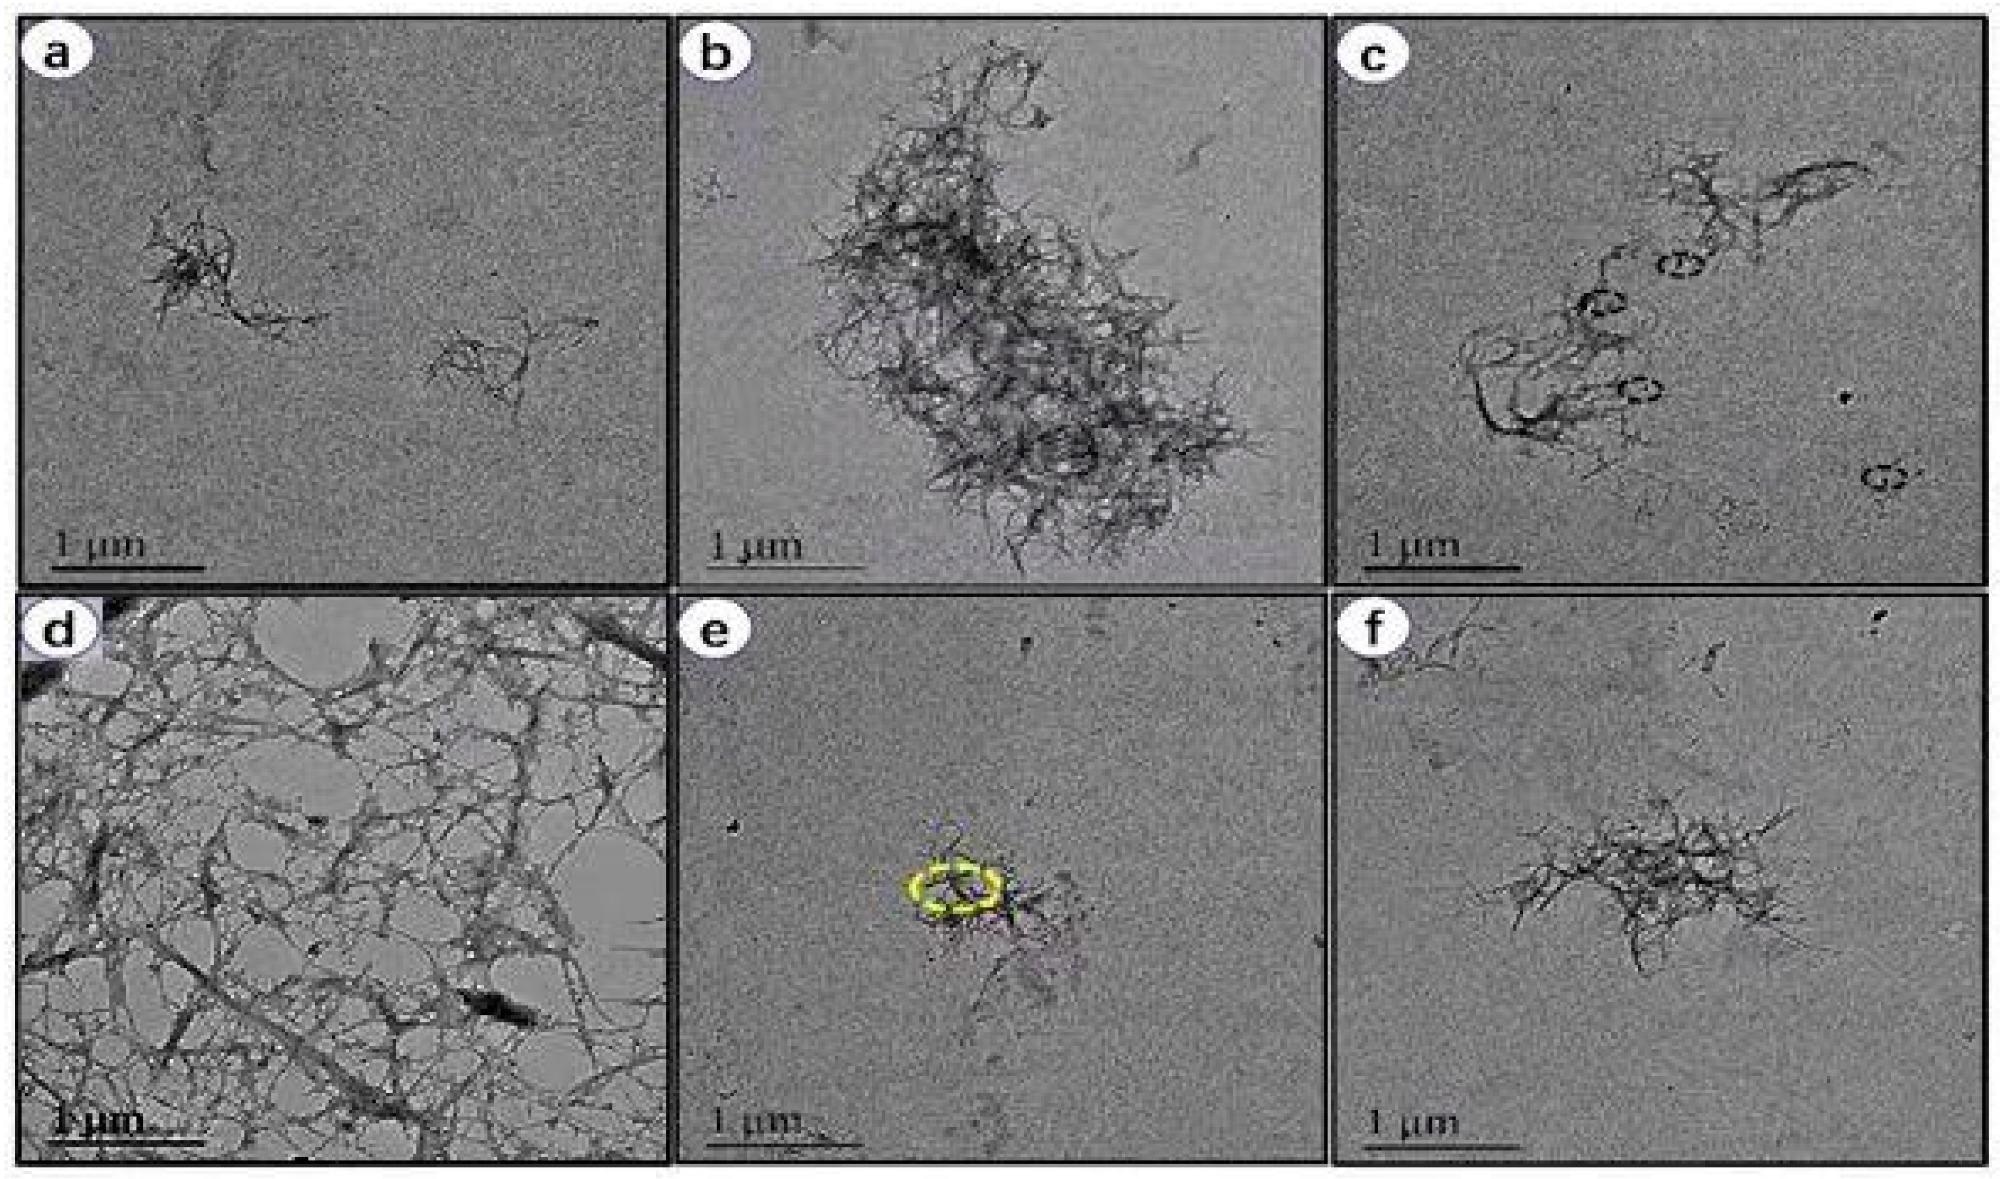 TEM images of lignocellulosic nanofibers (LCNFs): (a) TEM image of raw sisal fiber without phosphoric acid treatment. (b–e) TEM micrograph of nanofiber after treatment with phosphoric acid. The size of nanofiber is reduced significantly from micrometer to nanometer range. (f) Magnified view of selected yellow circle area from panel (e).